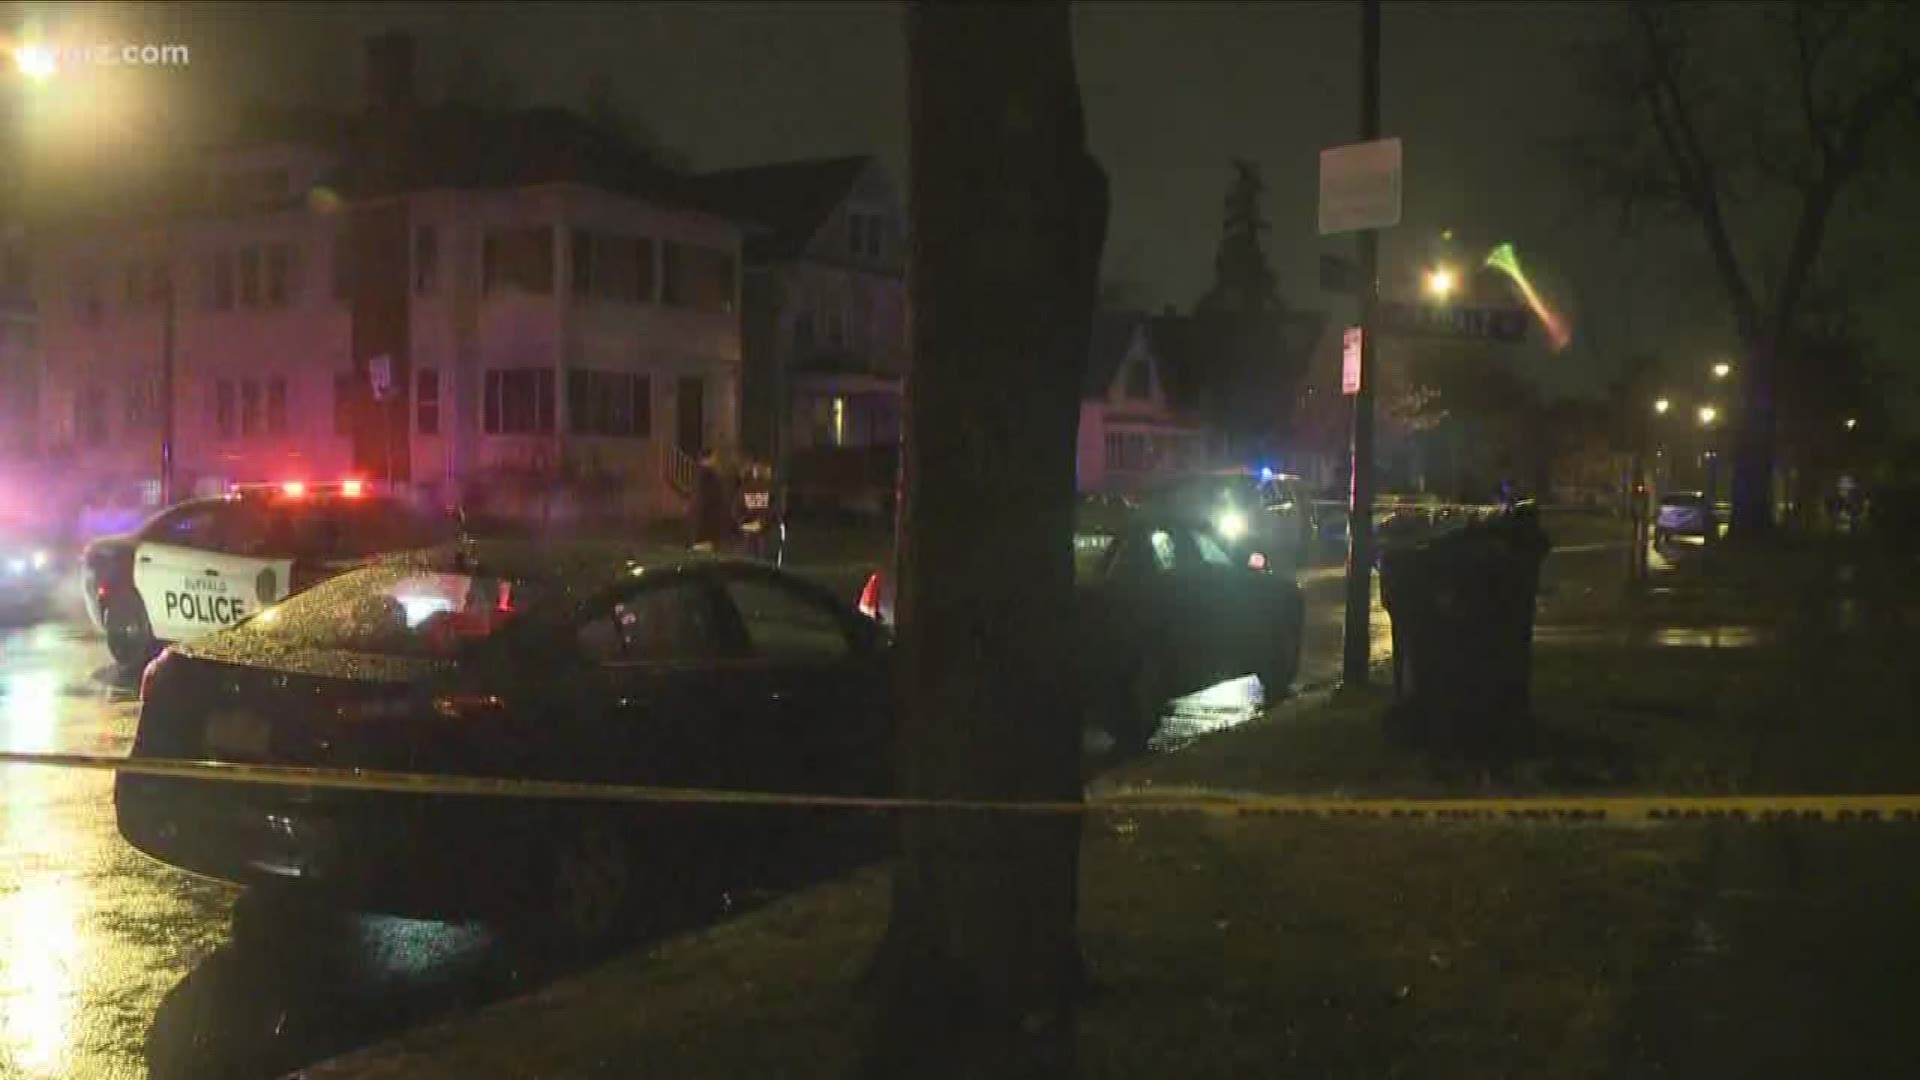 No one was willing to go on camera to describe what they may have seen here, at about 10:40 last night, when a man was shot by buffalo police on Northland Avenue.